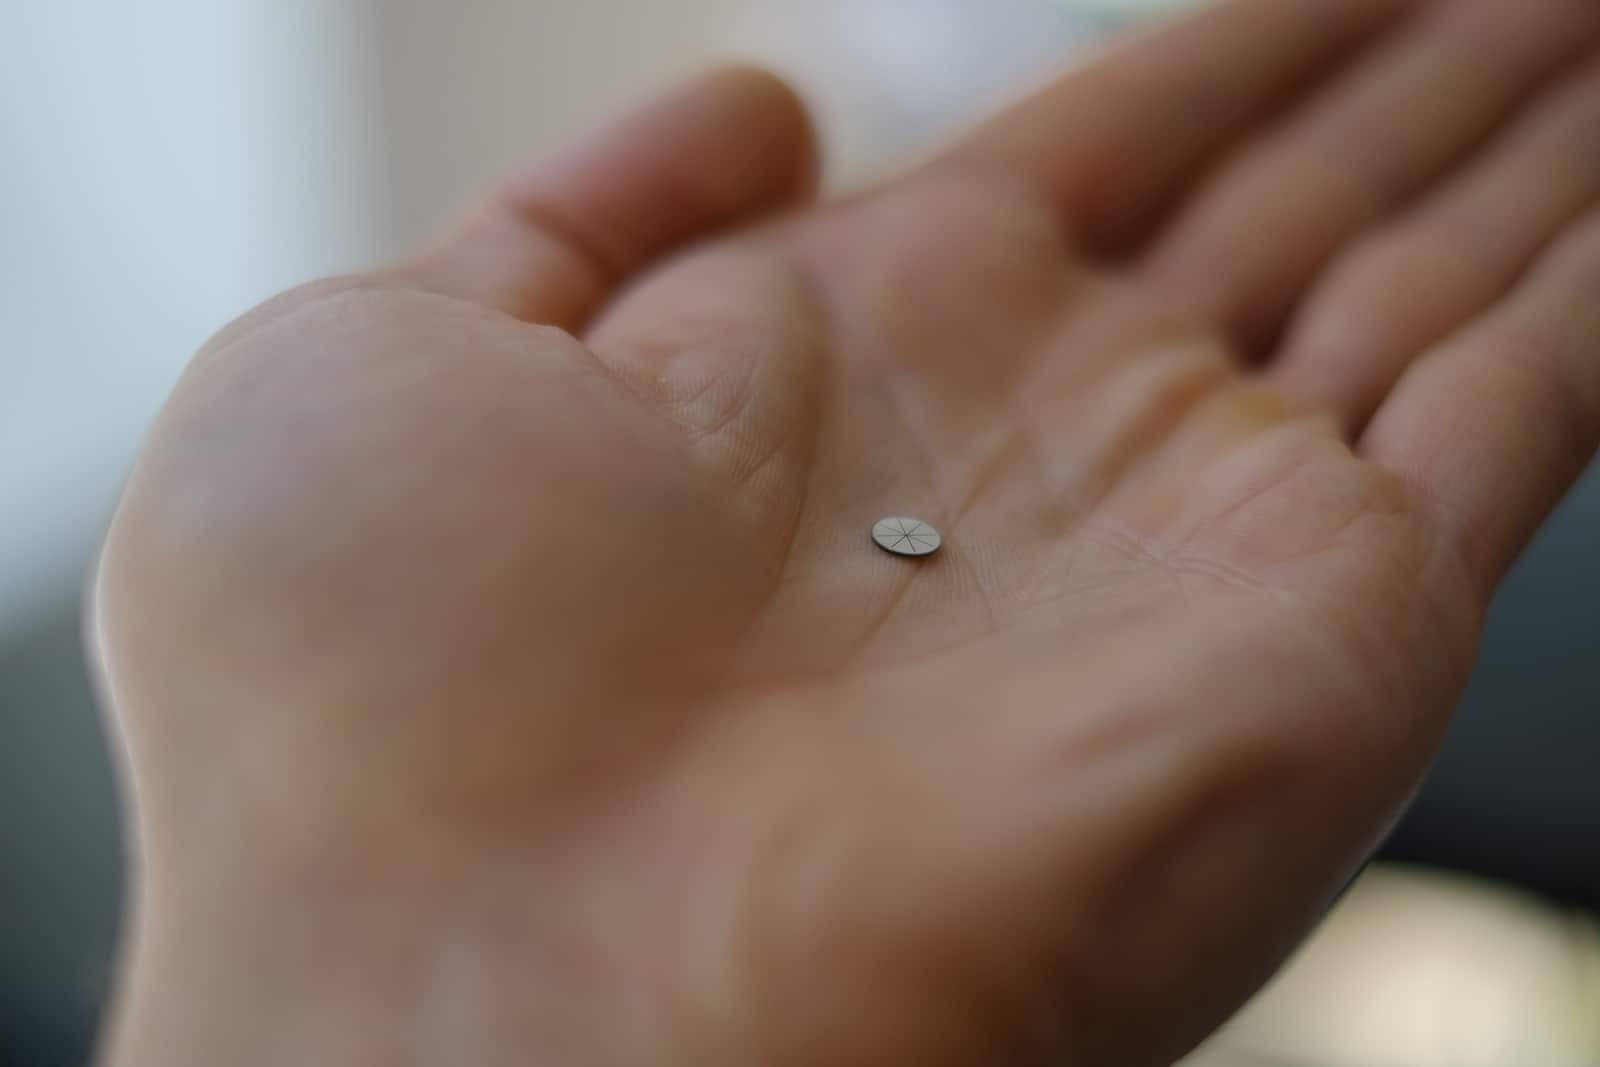 The Ultimate Hearing Aid: A Button Sized Contact Lens For The Ear